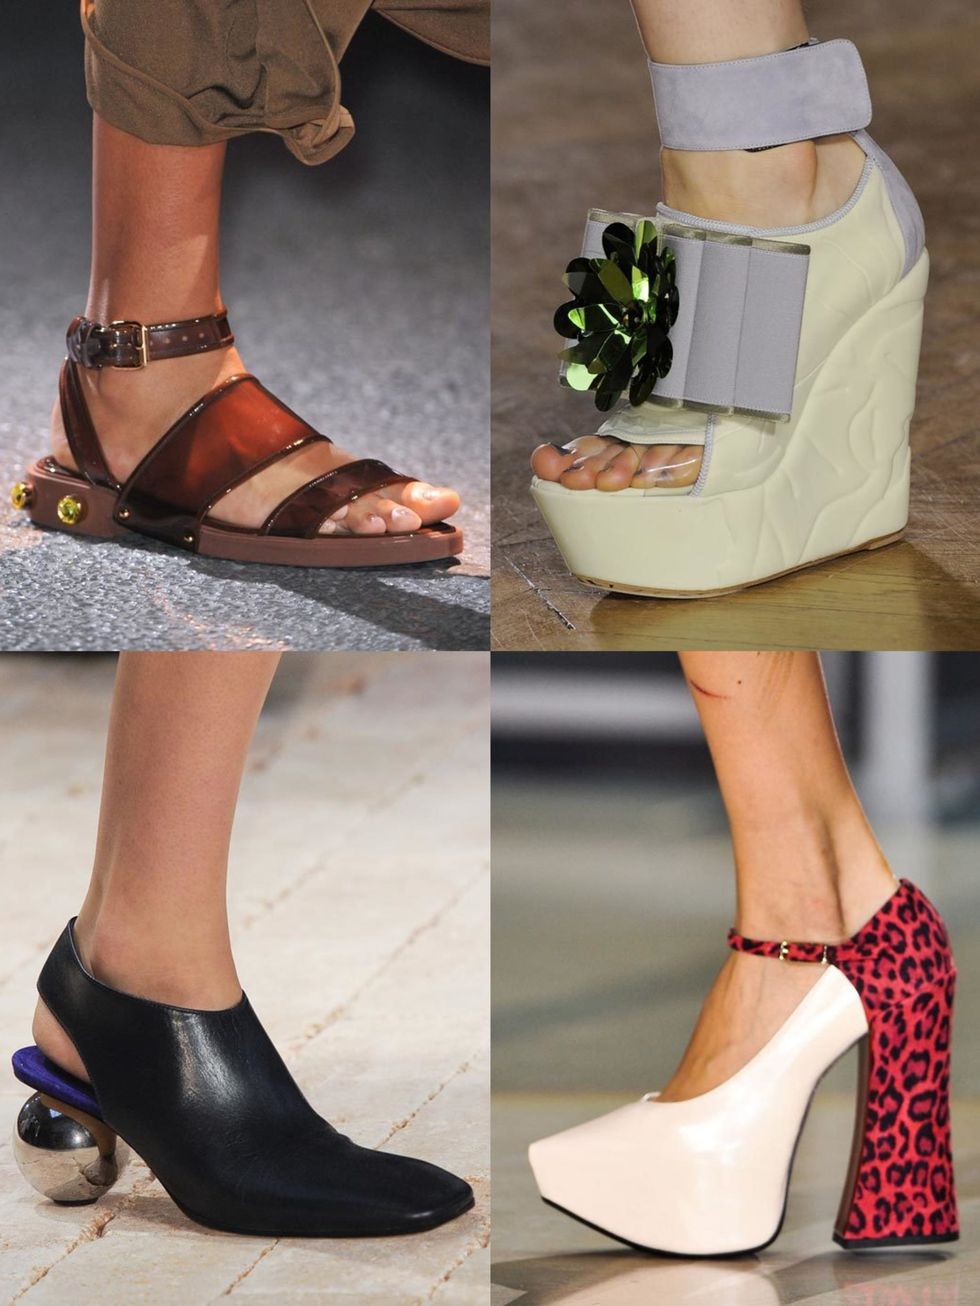 <p>Our pick of the most coveted shoes seen on the s/s 2014 catwalk at New York Fashion Week.</p><p><a href="http://www.elleuk.com/fashion/trends/london-fashion-week-milan-fashion-week-paris-fashion-week-new-york-fashion-week-spring-summer-collections-2014